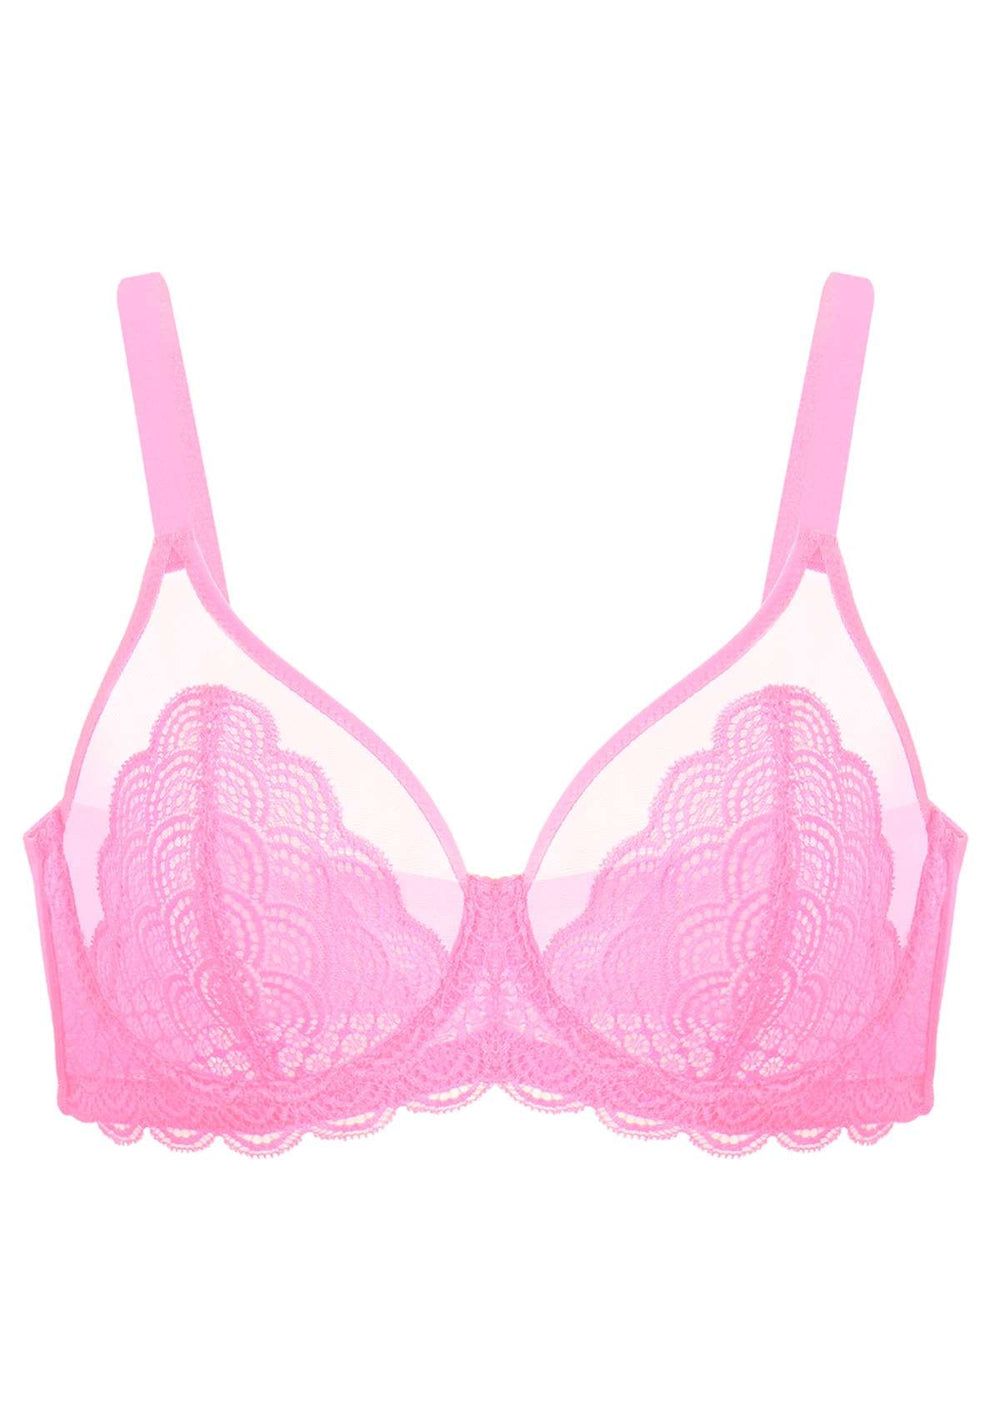 Unlined Lace Bra - Flamingo pink